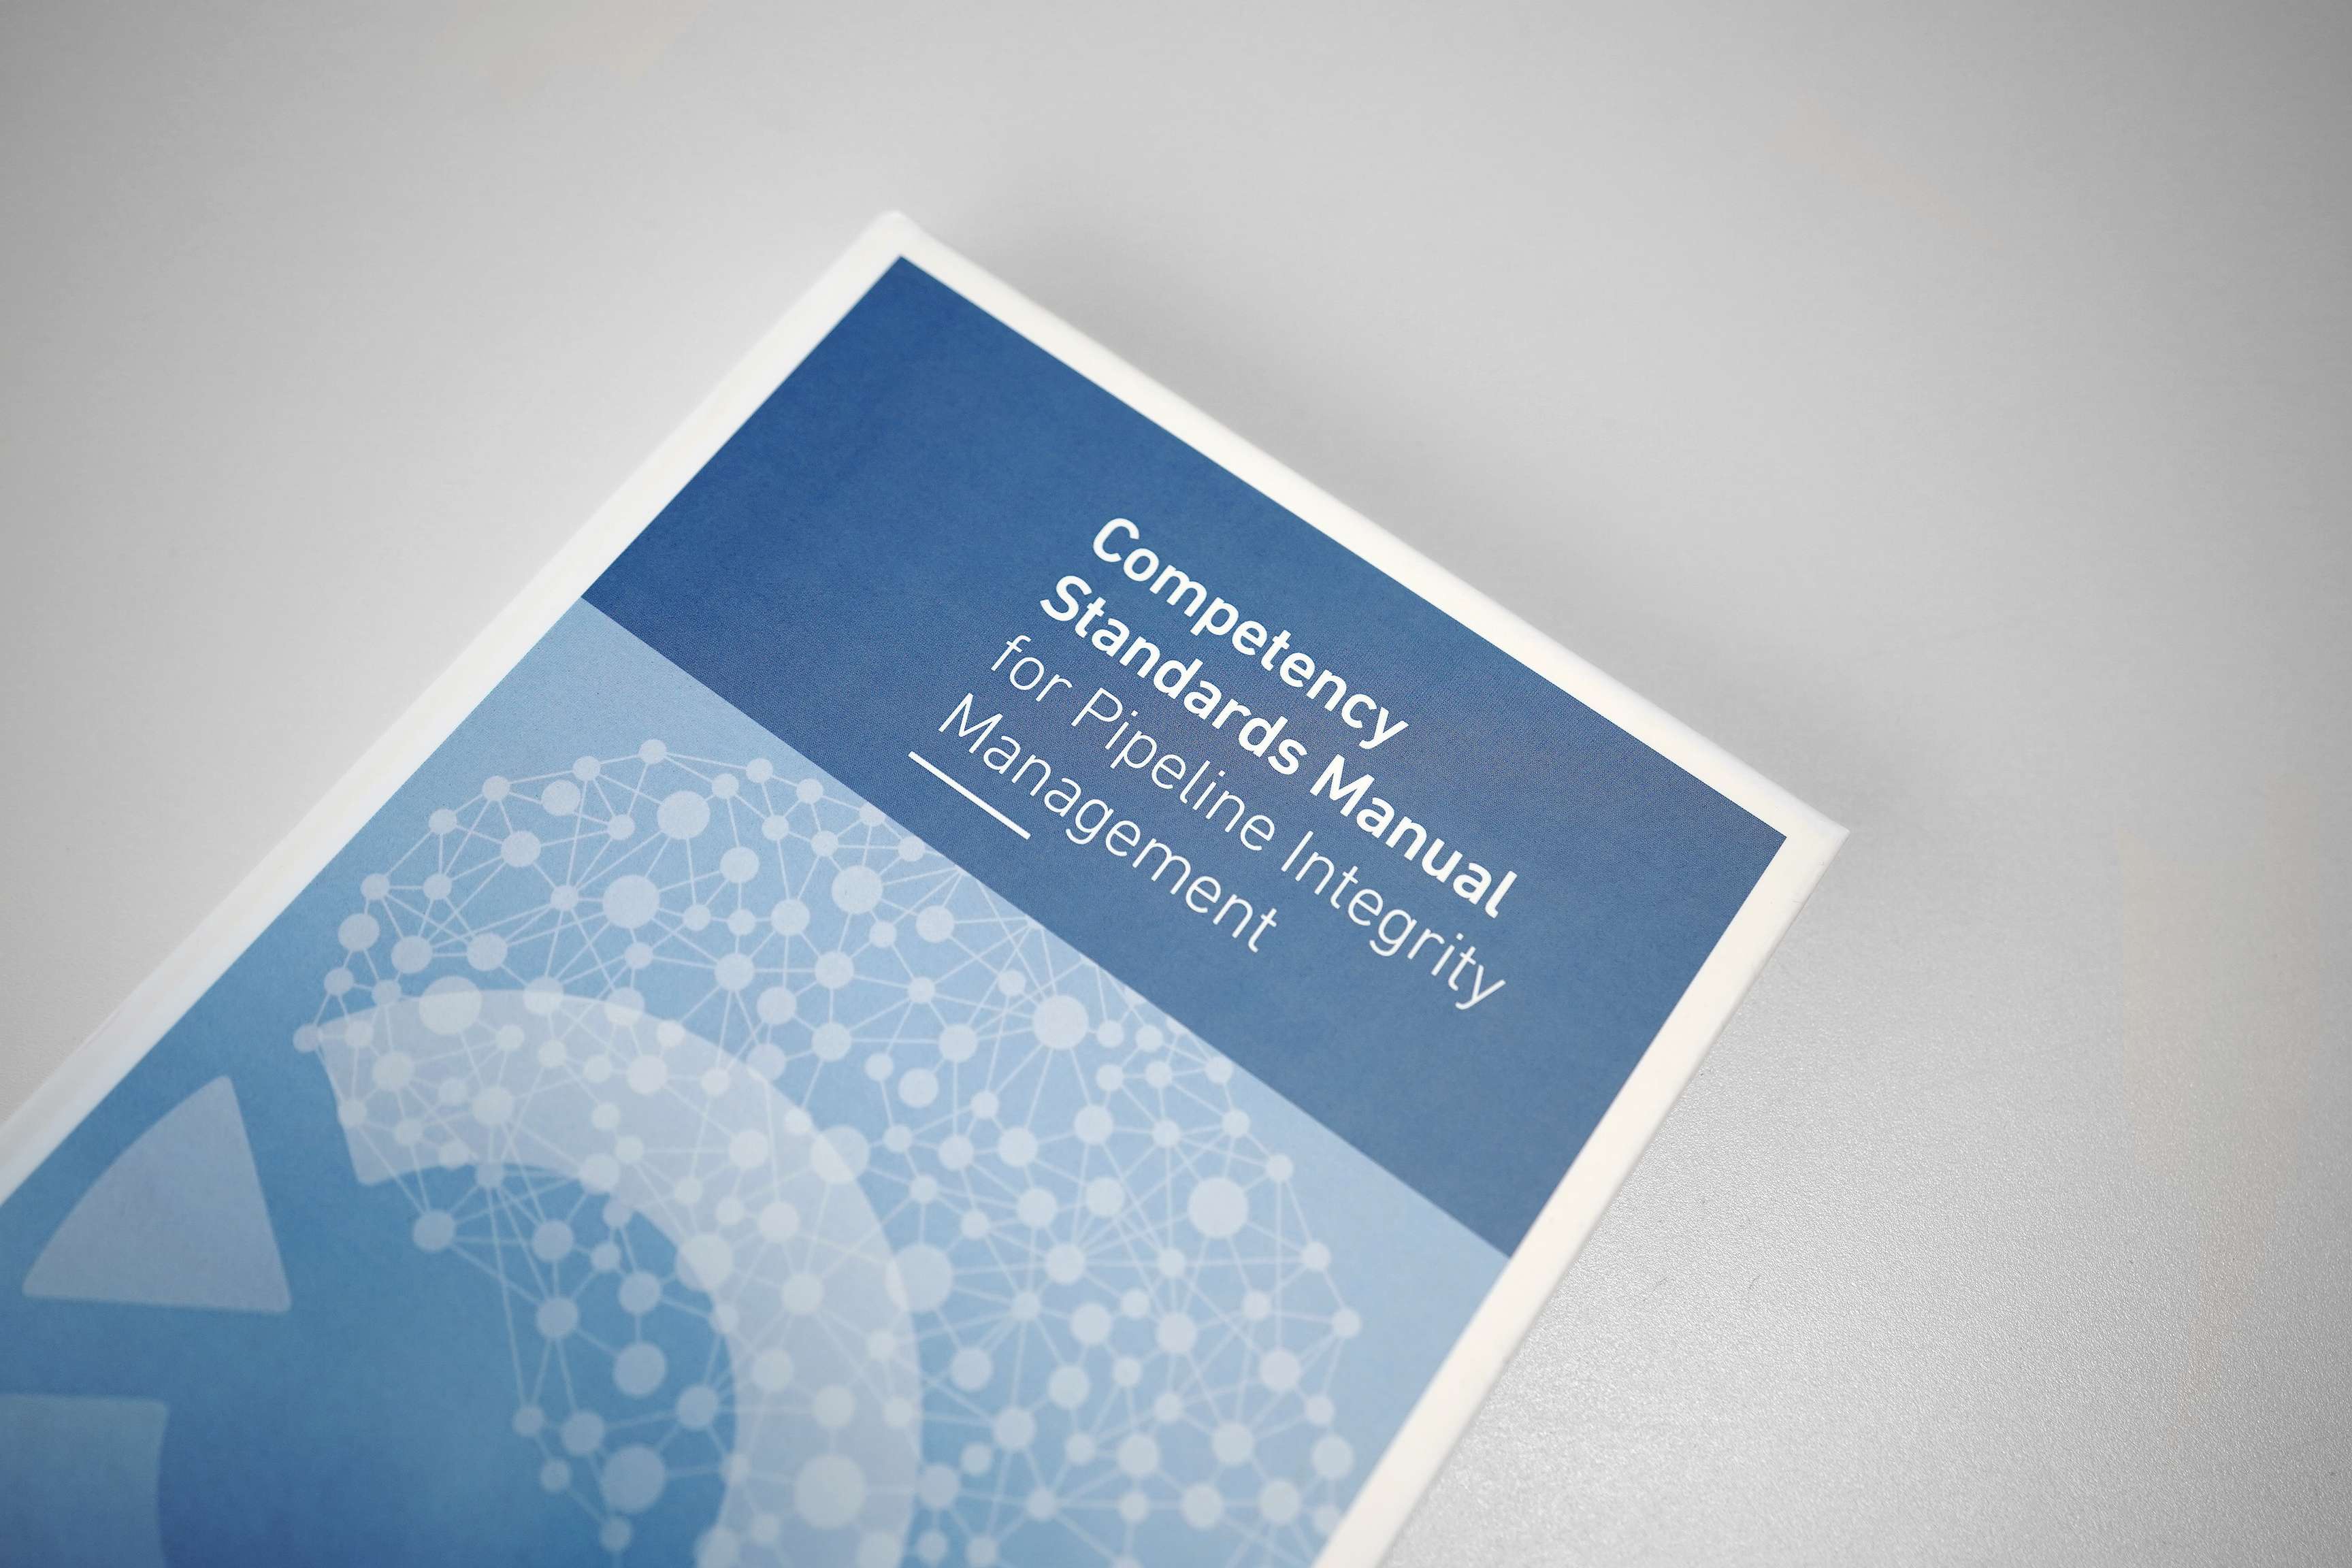 Picture of our Competency Standards Manual.